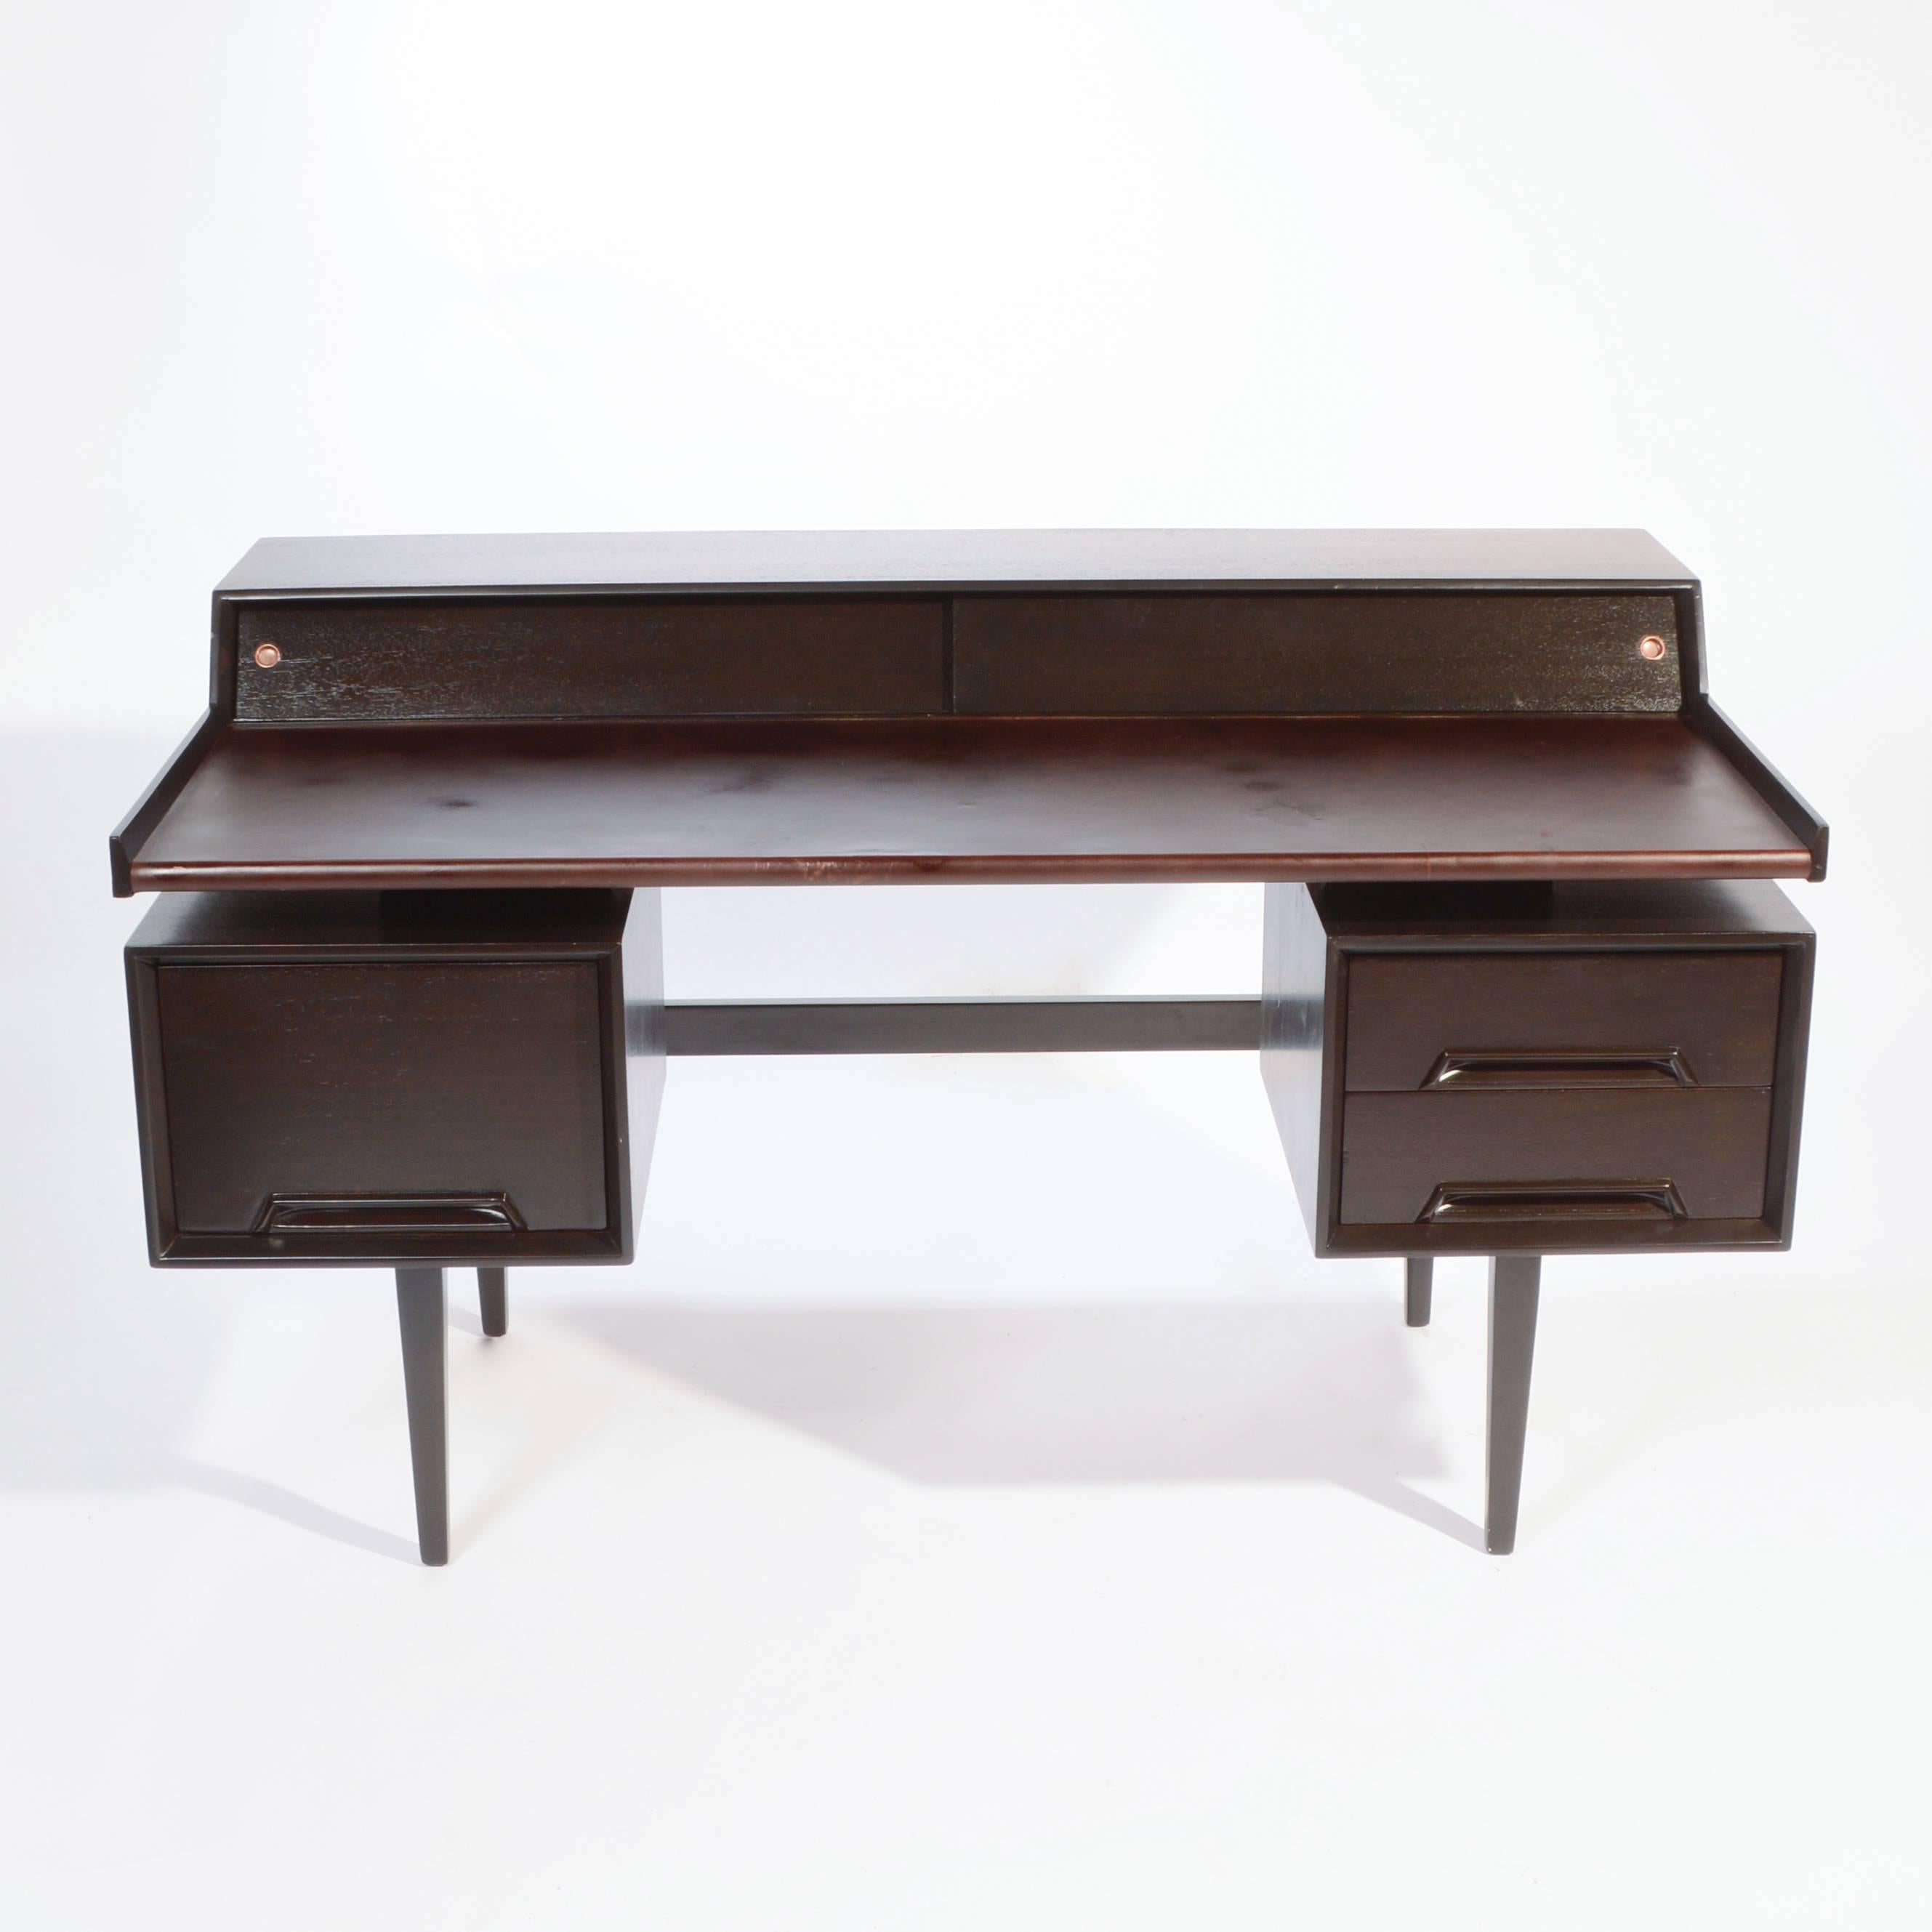 This is a fully restored Milo Baughman Floating-Top Desk from the Perspective line by Drexel. Desk Features two shallow drawers and one file drawer with dividers. Top has two sliding doors that open to reveal storage compartments. 
Writing surface